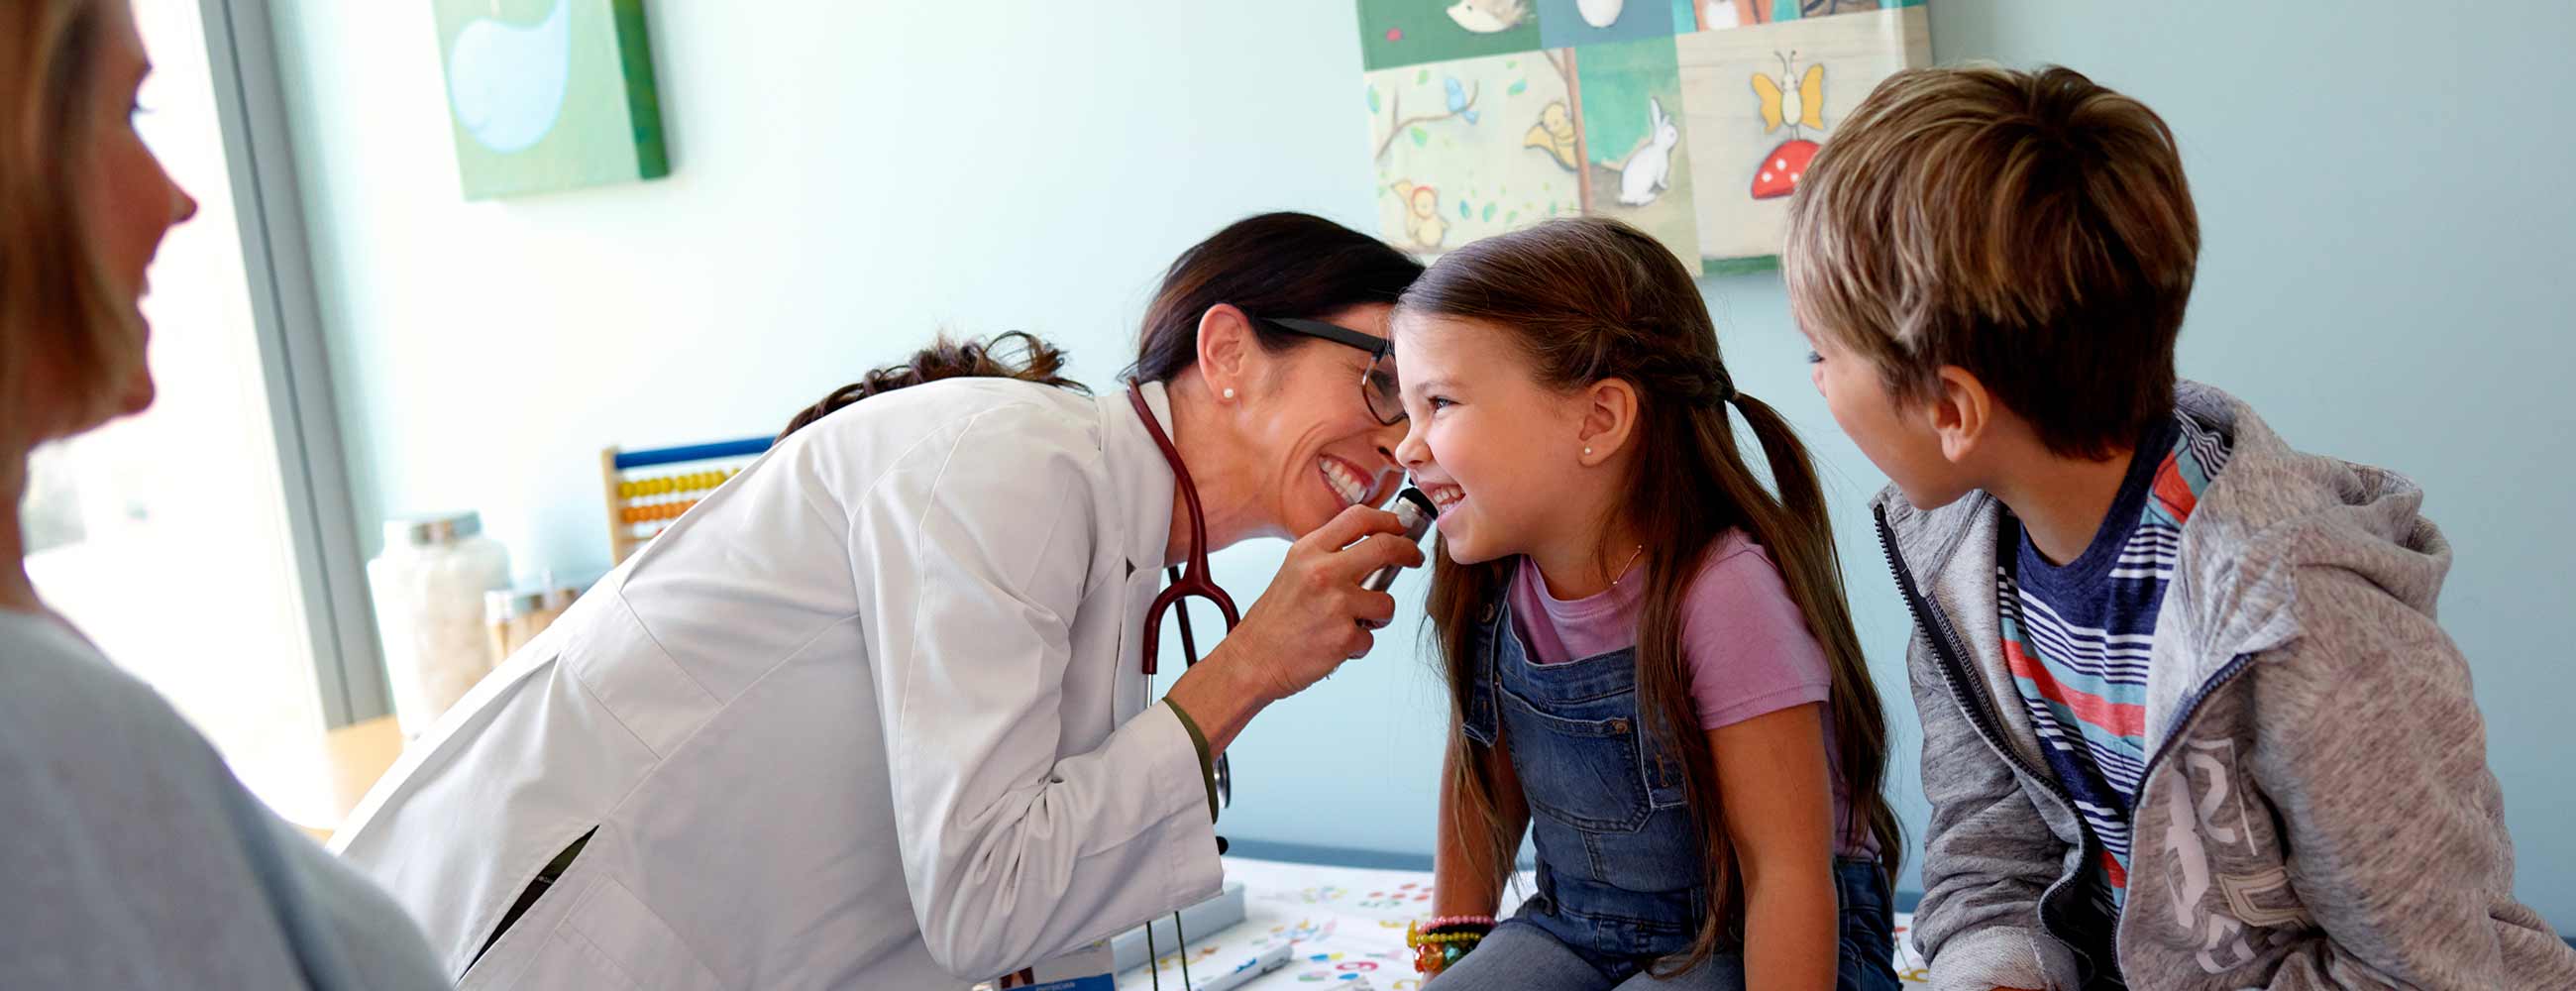 A smiling physician examining a young girl's ear with an  otoscope.